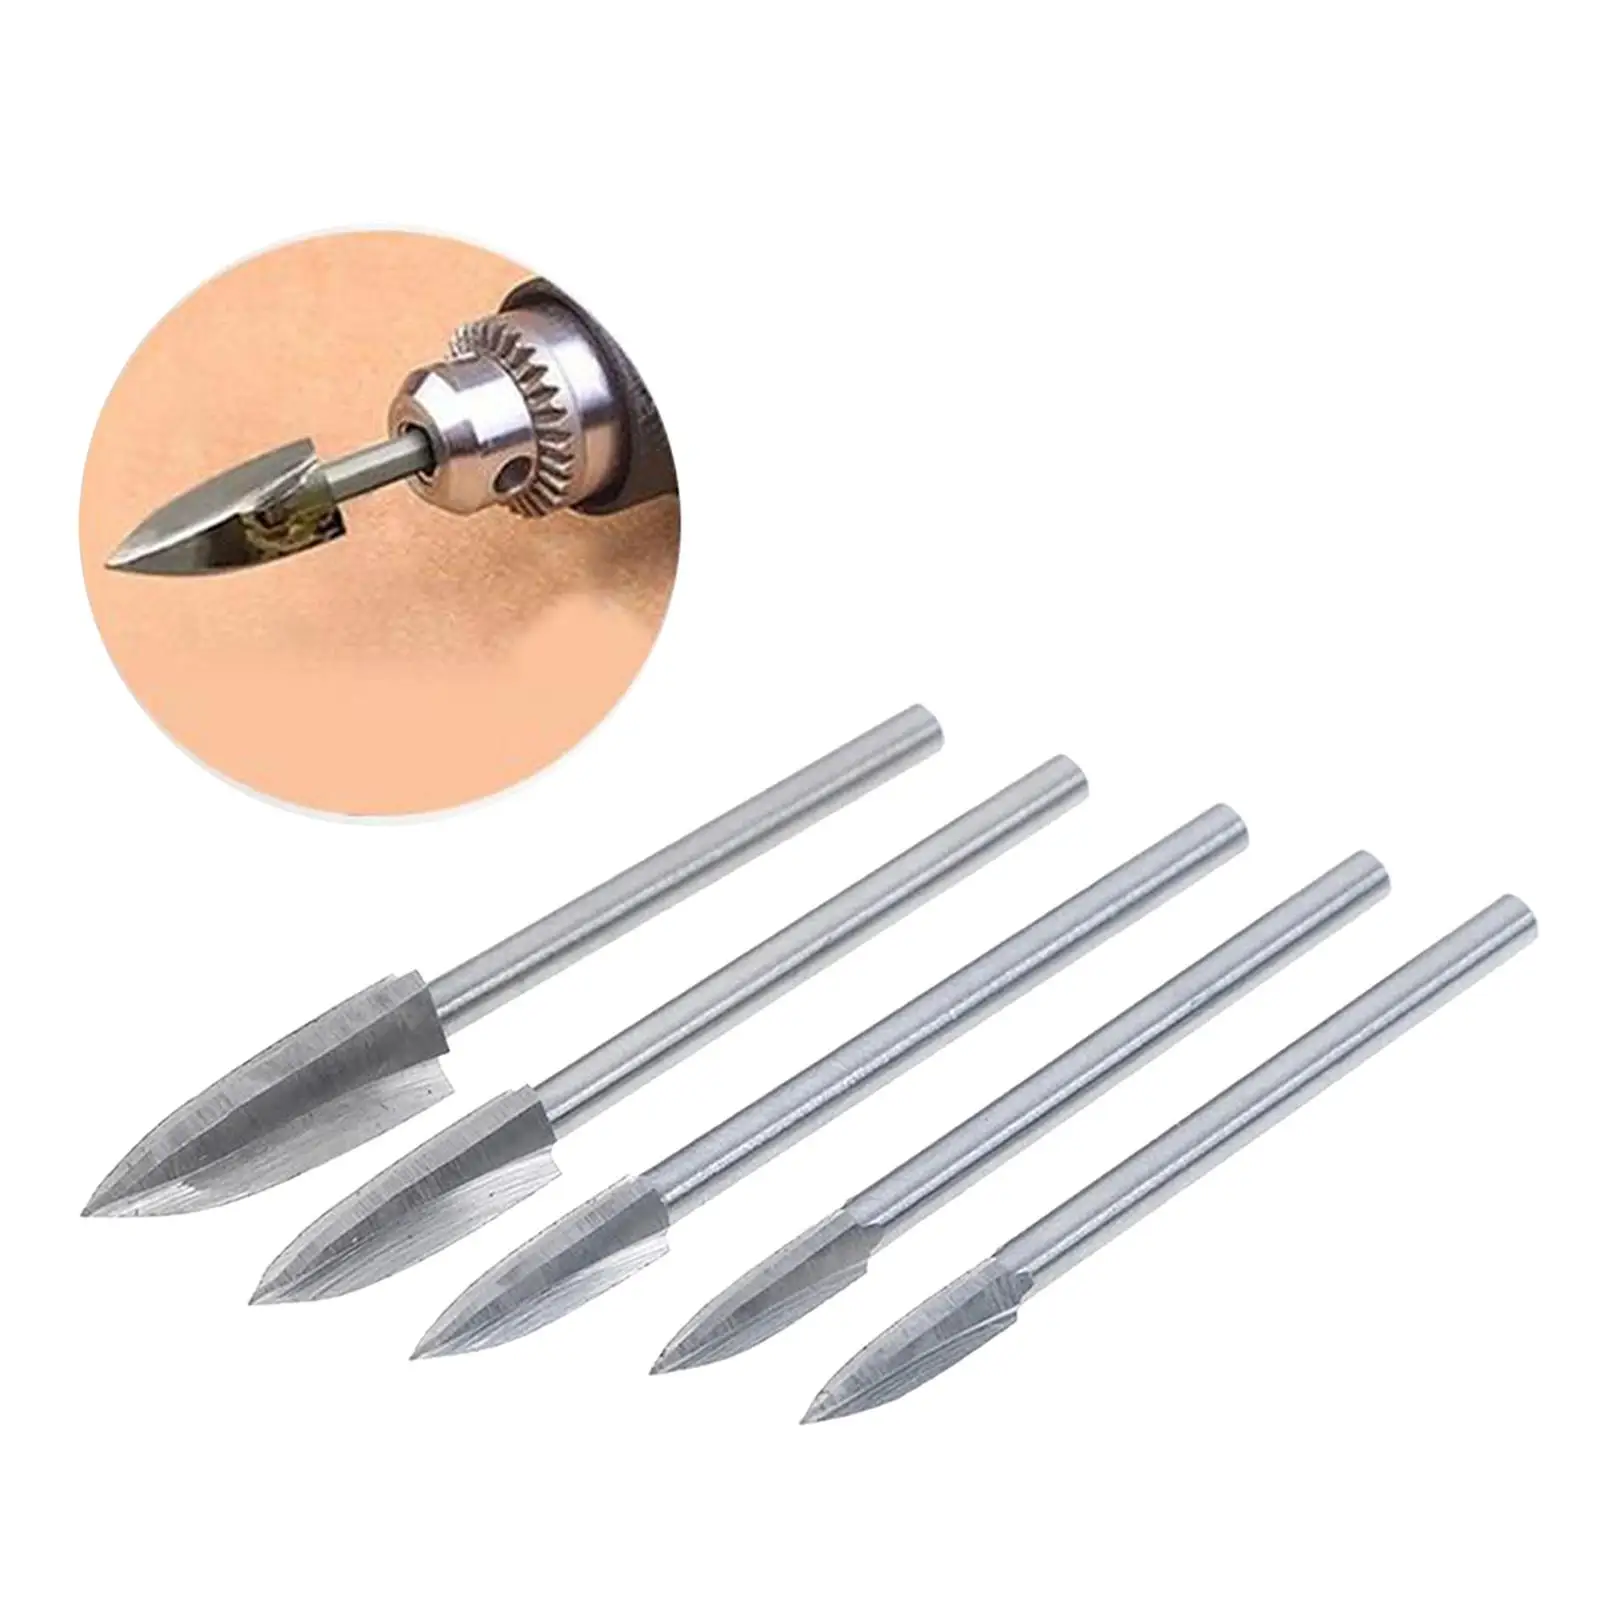 Professional Woodworking Turning Tool Woodturning HSS Blade Lathe Set for Carving